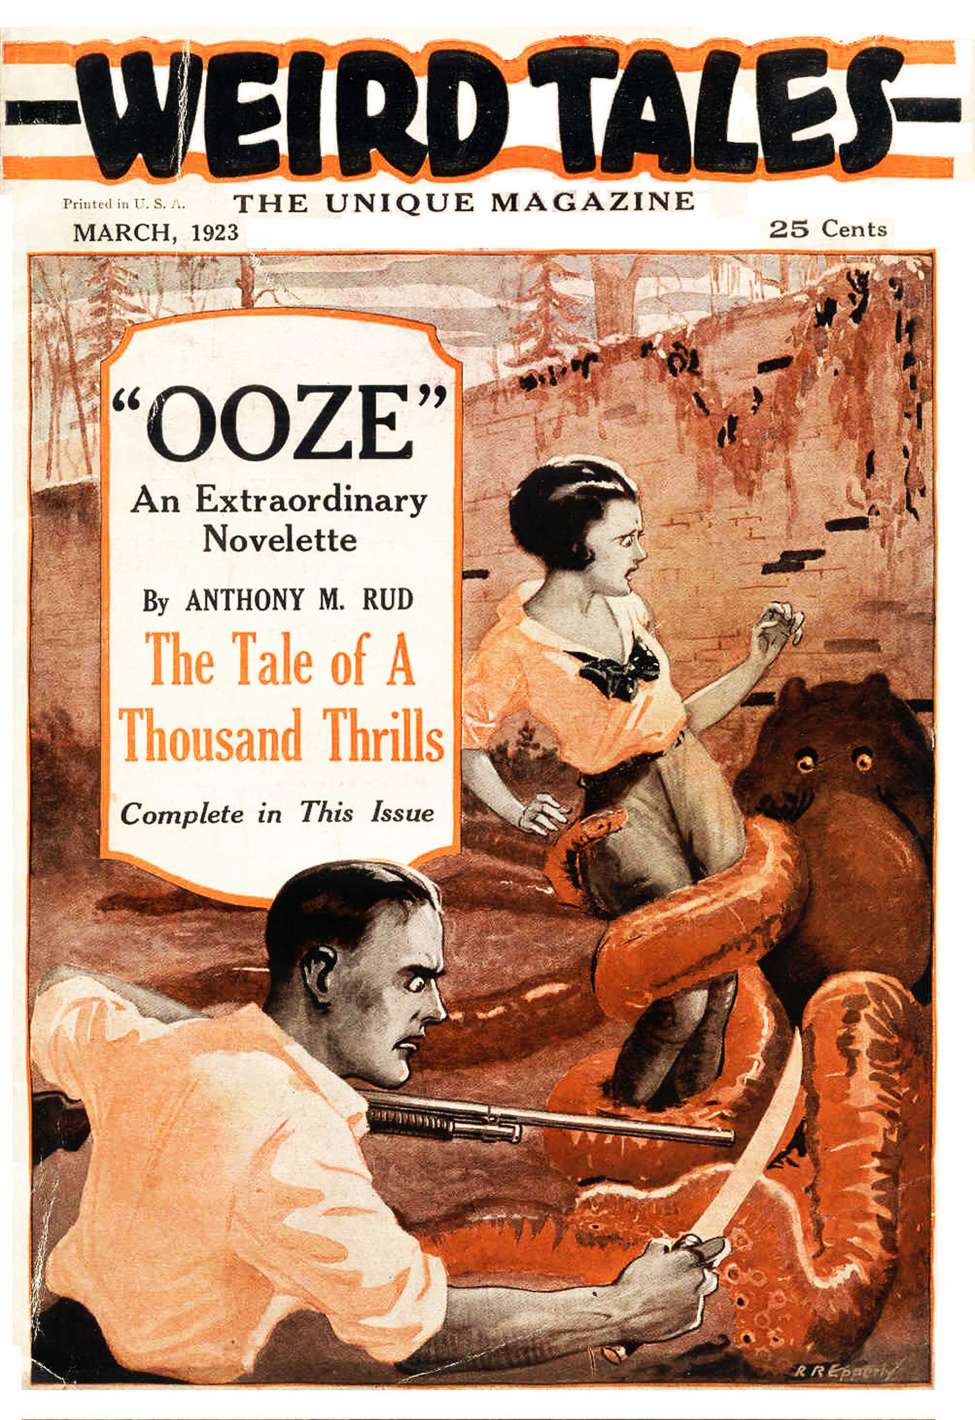 Book Cover For Weird Tales v1 1 - Ooze - Anthony M. Rud